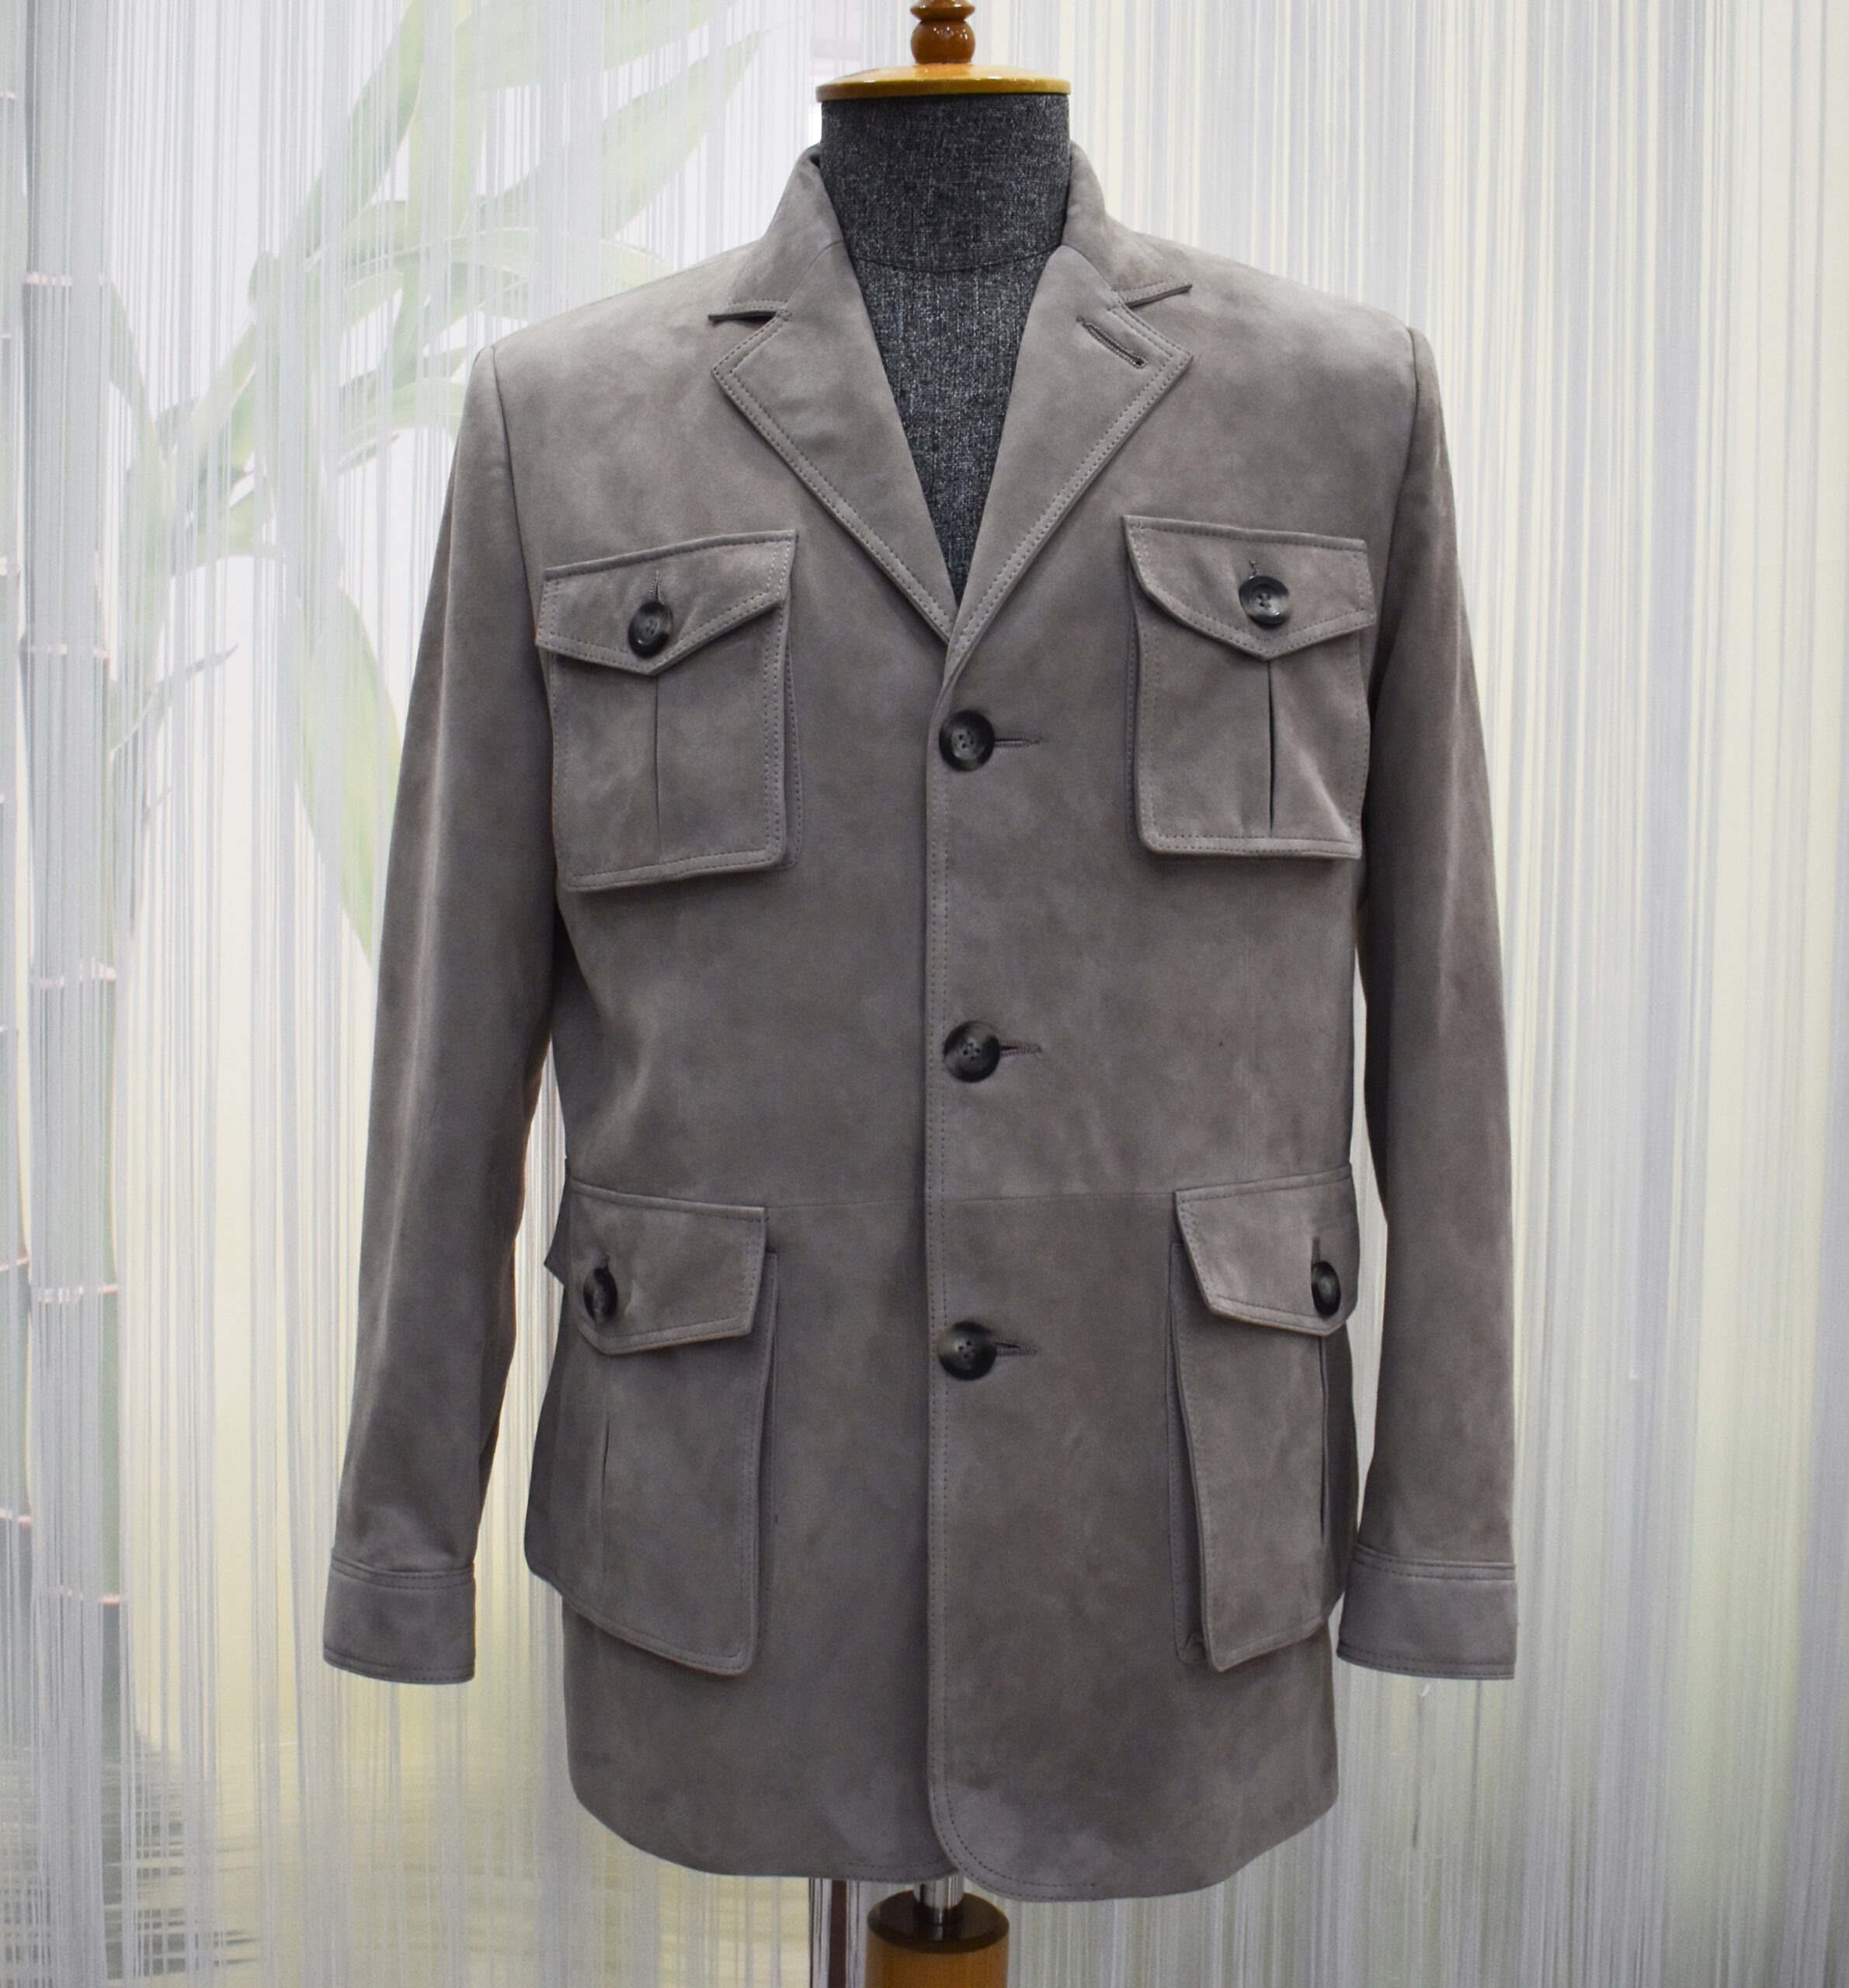 SR Grey Suede Long Jacket - Leather Guys